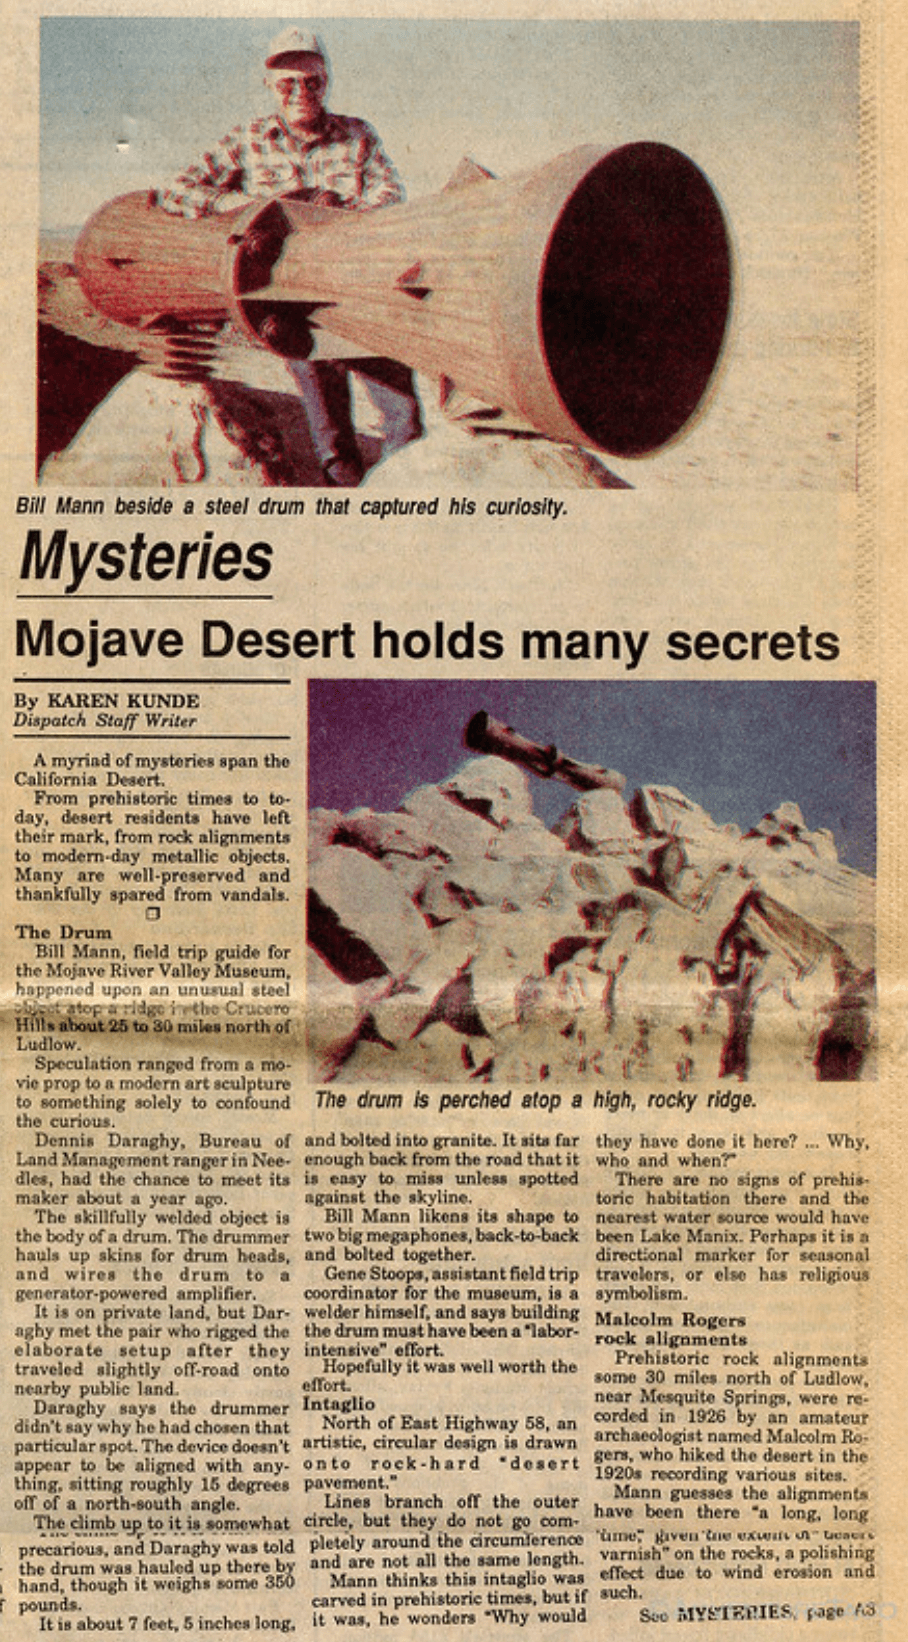 The Sentinel Enigma - A Mystery in the Mojave Desert_Dispatch Article